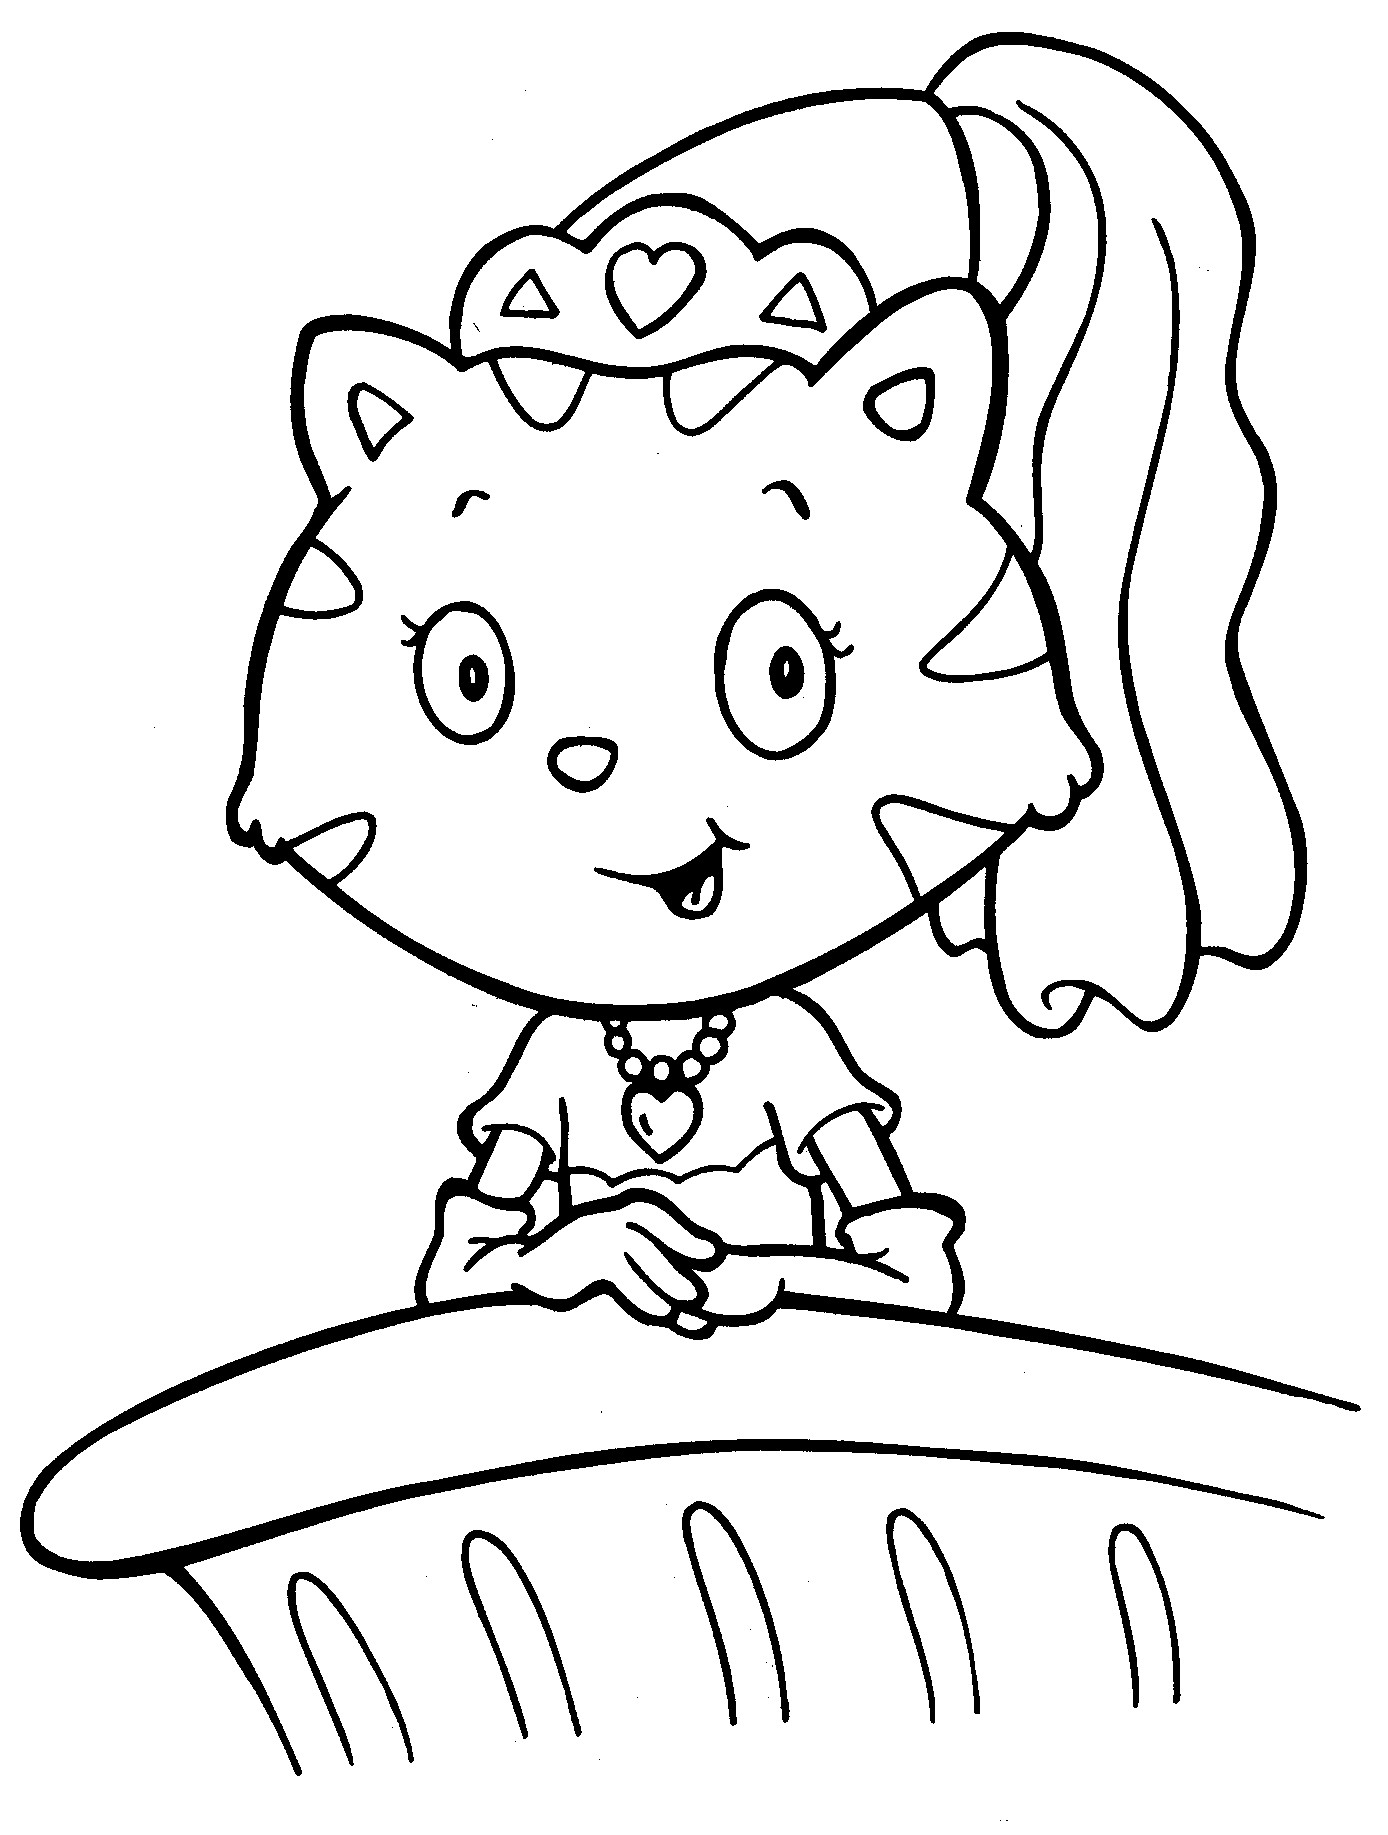 Download Cat To Colour Kitty Coloring Pages For Kids 12